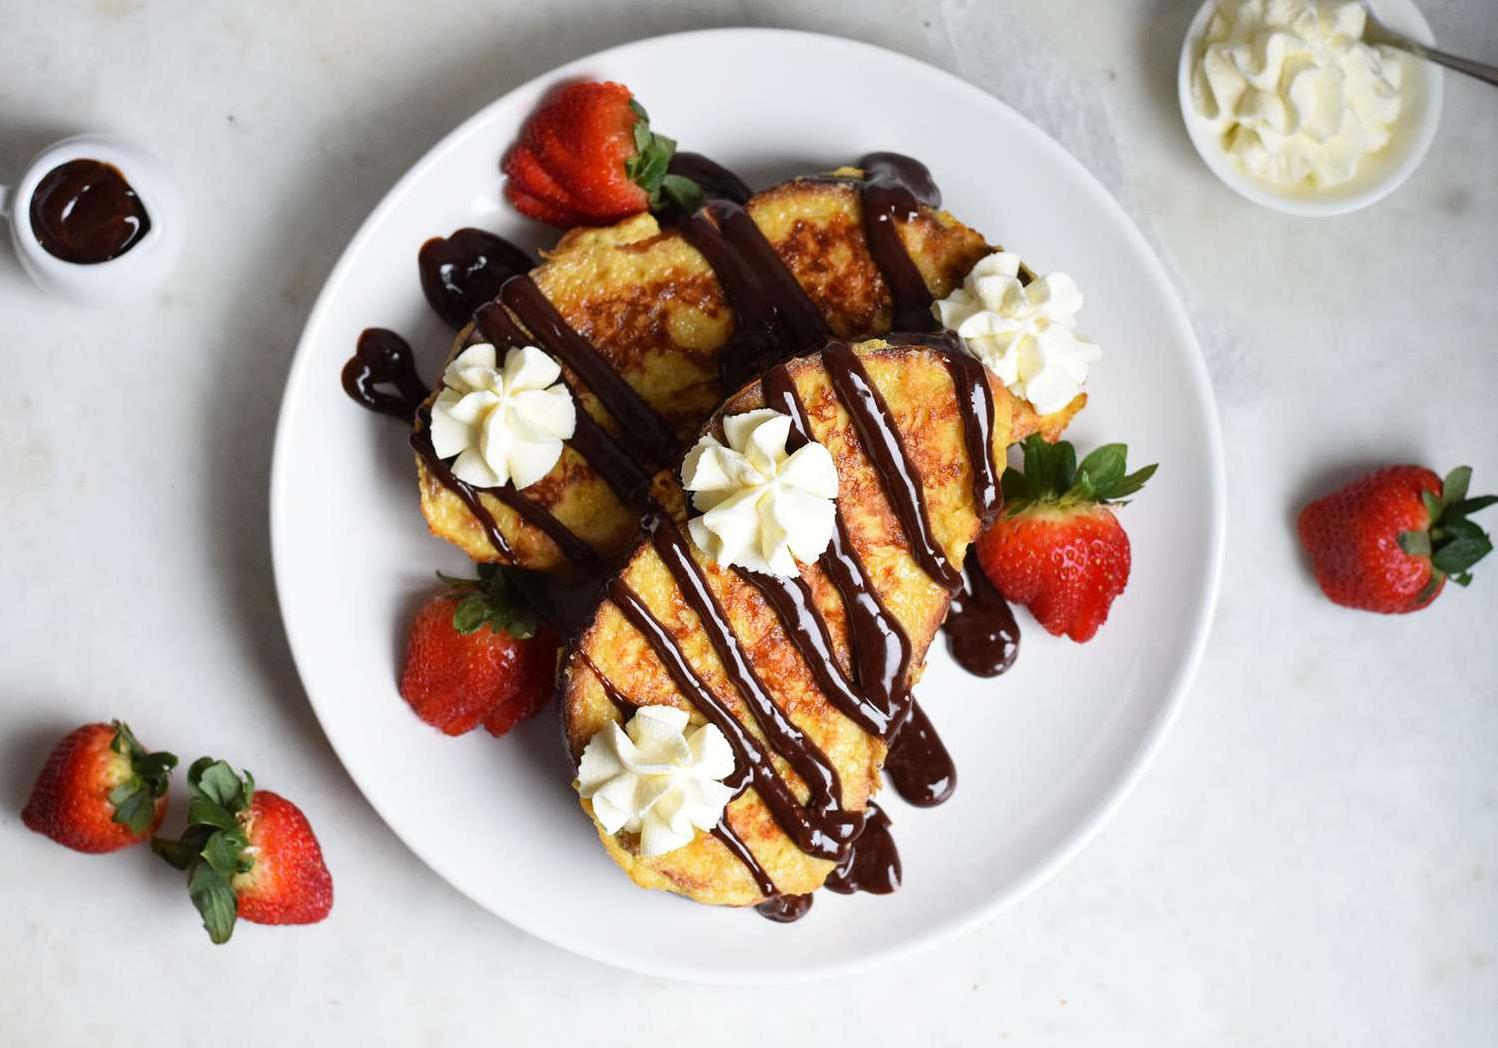  Get ready to fall in love with breakfast again with this luscious Irish Cream French Toast.